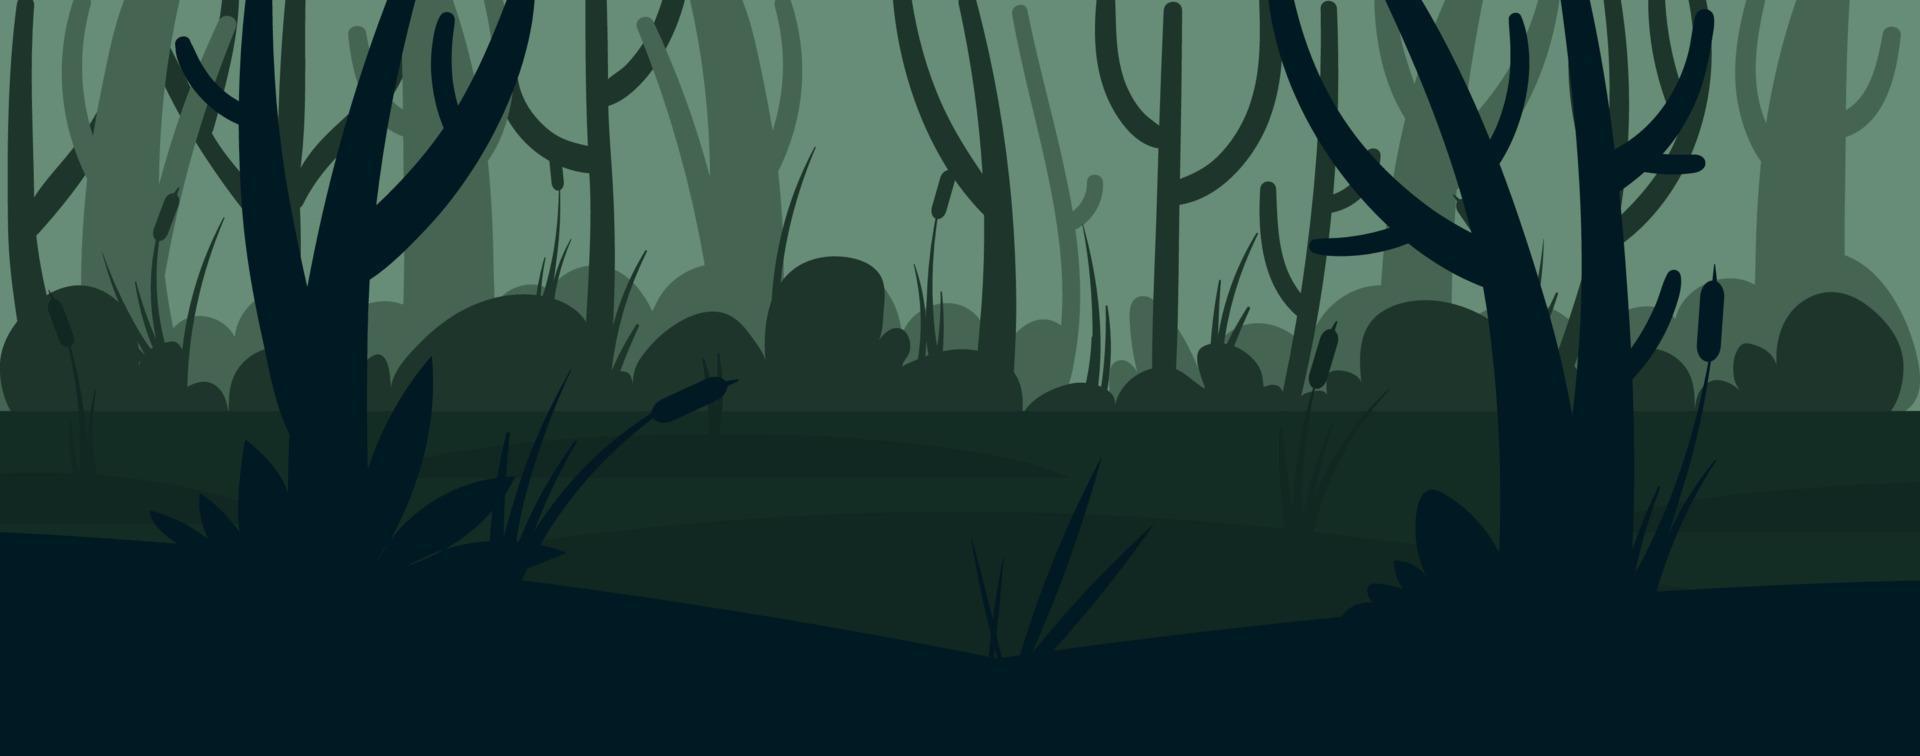 Cartoon forest background with pond or swamp. Rainforest landscape scary night silhouette with a water, tree trunks and marsh grass. Vector cartoon illustration of wild jungle, forest